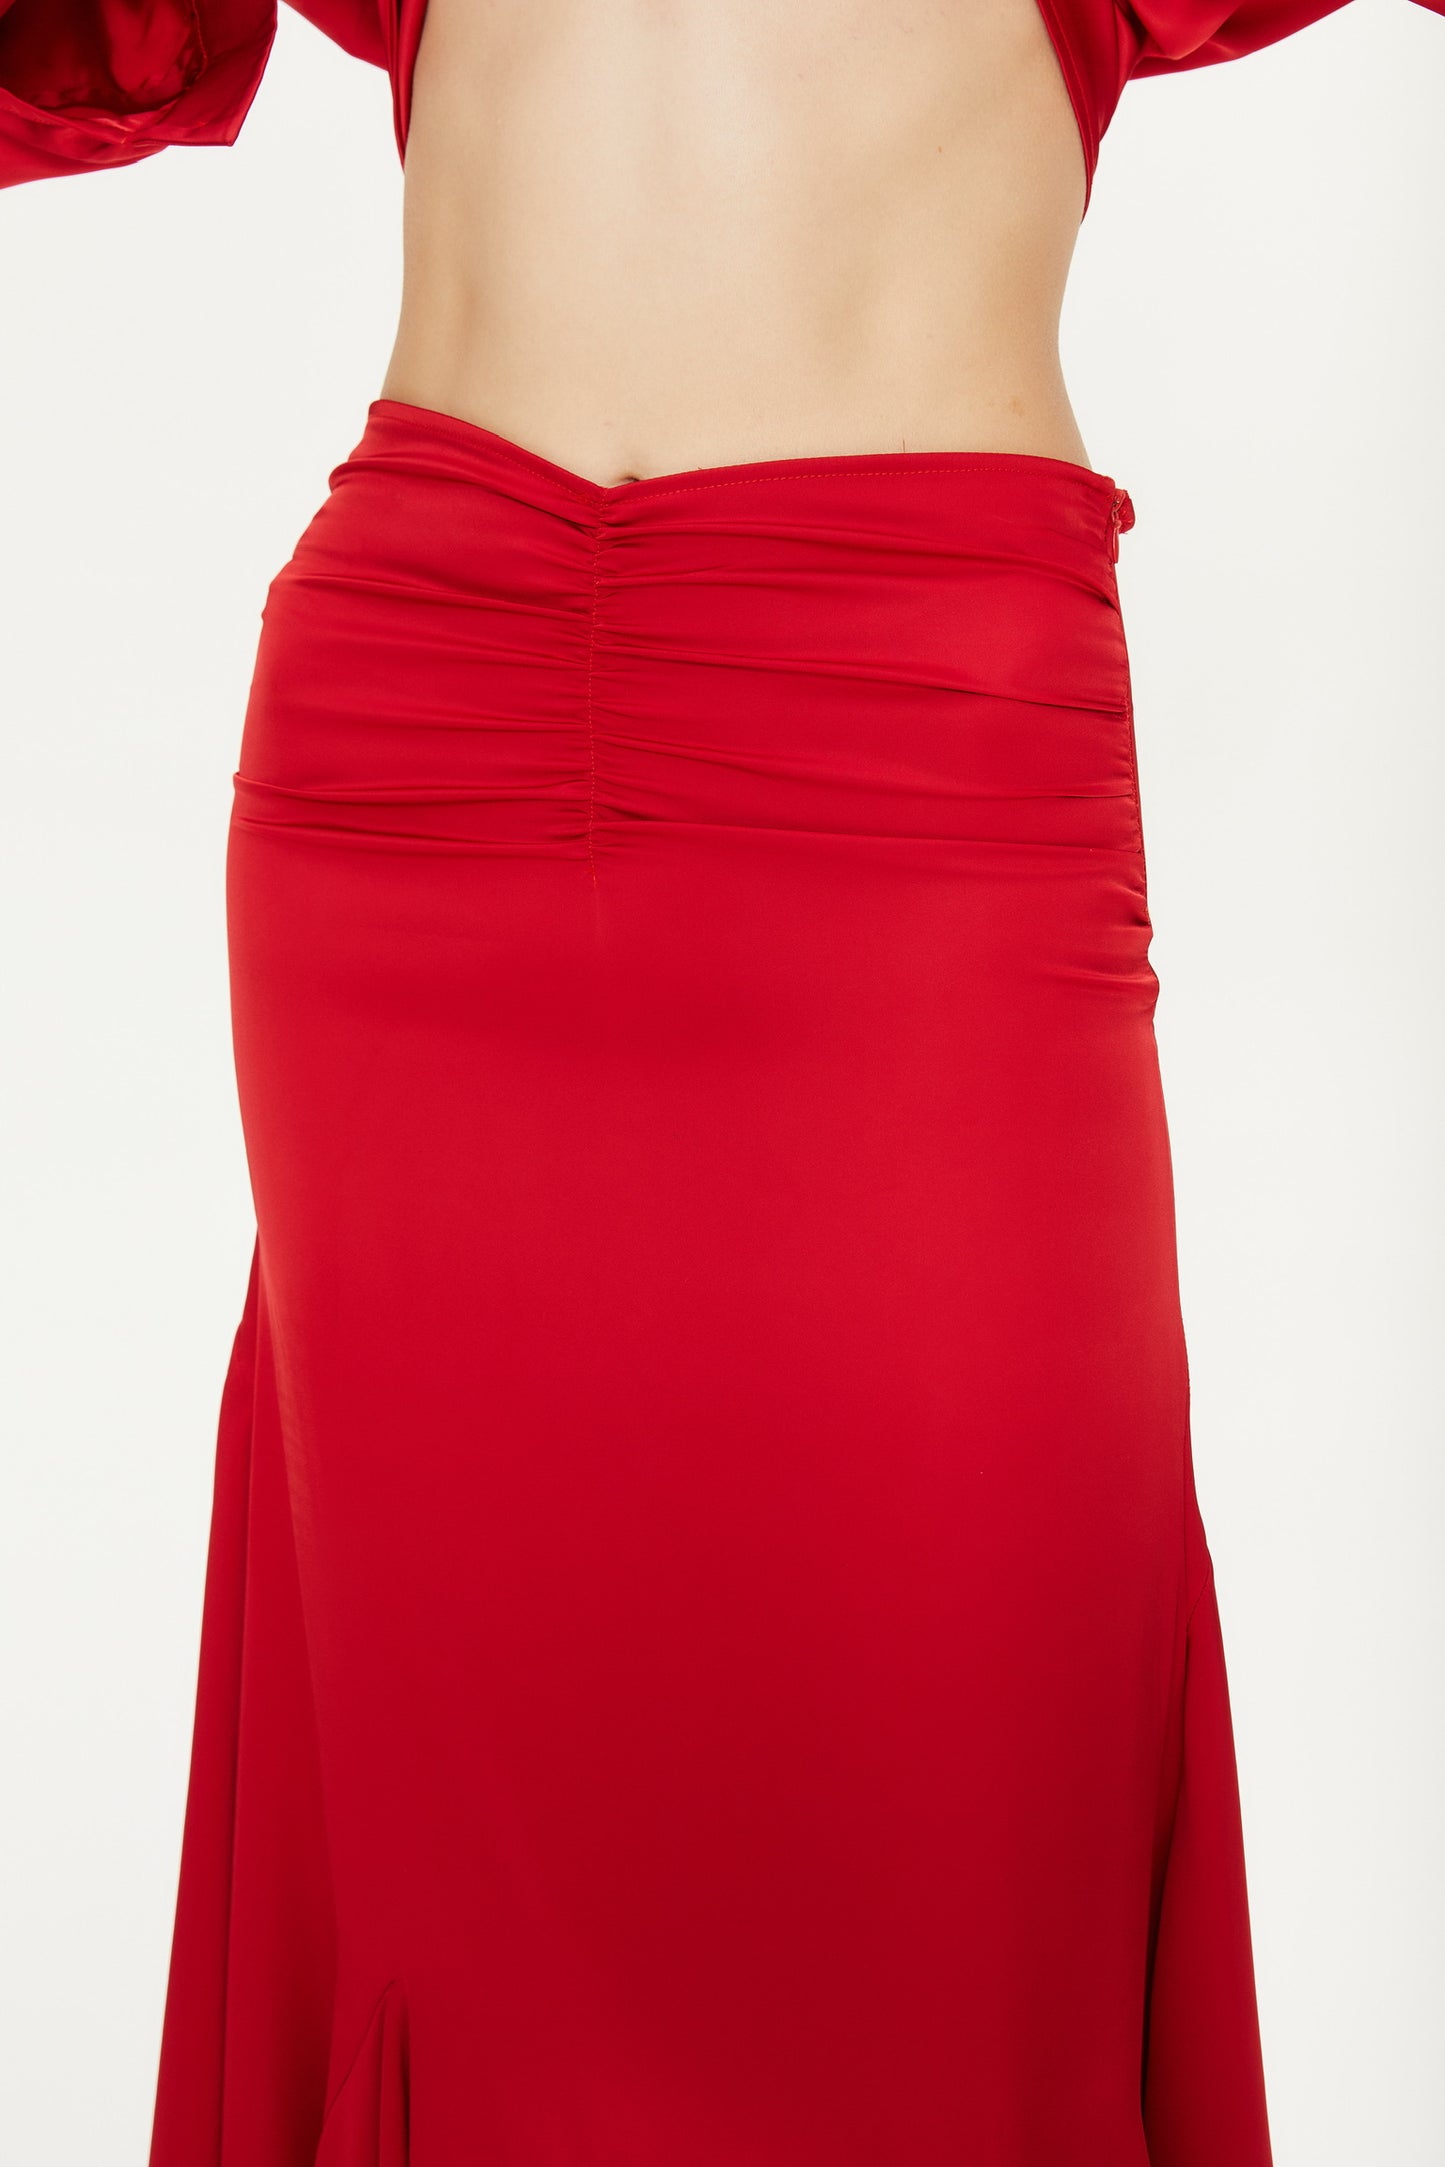 Pola Pleated Fishtail Skirt in Red